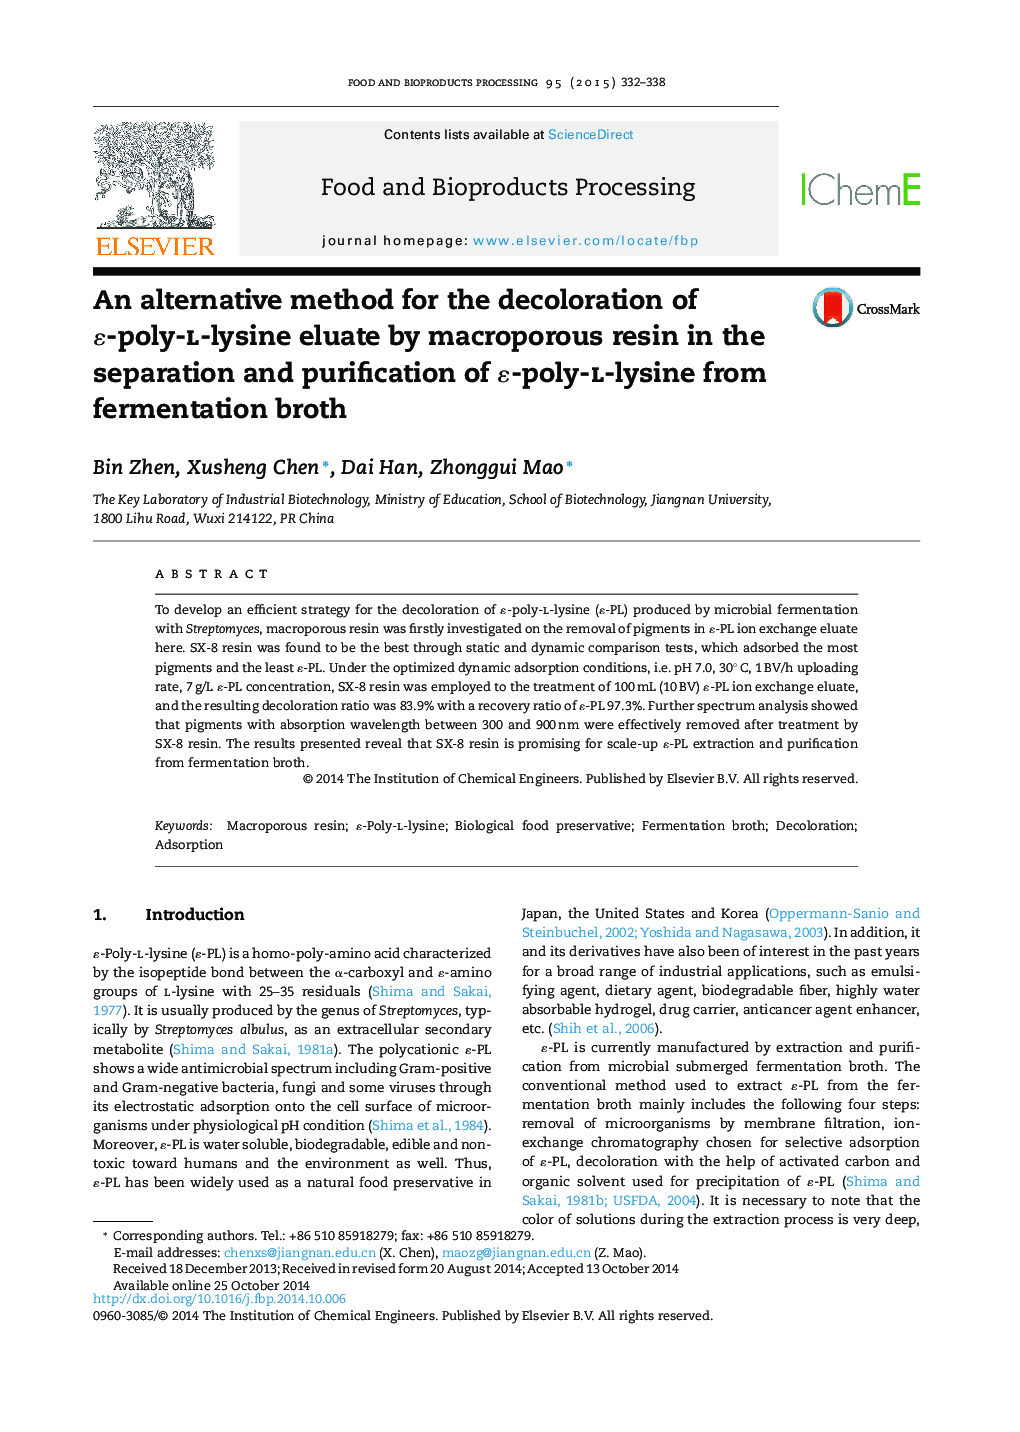 An alternative method for the decoloration of ɛ-poly-l-lysine eluate by macroporous resin in the separation and purification of ɛ-poly-l-lysine from fermentation broth